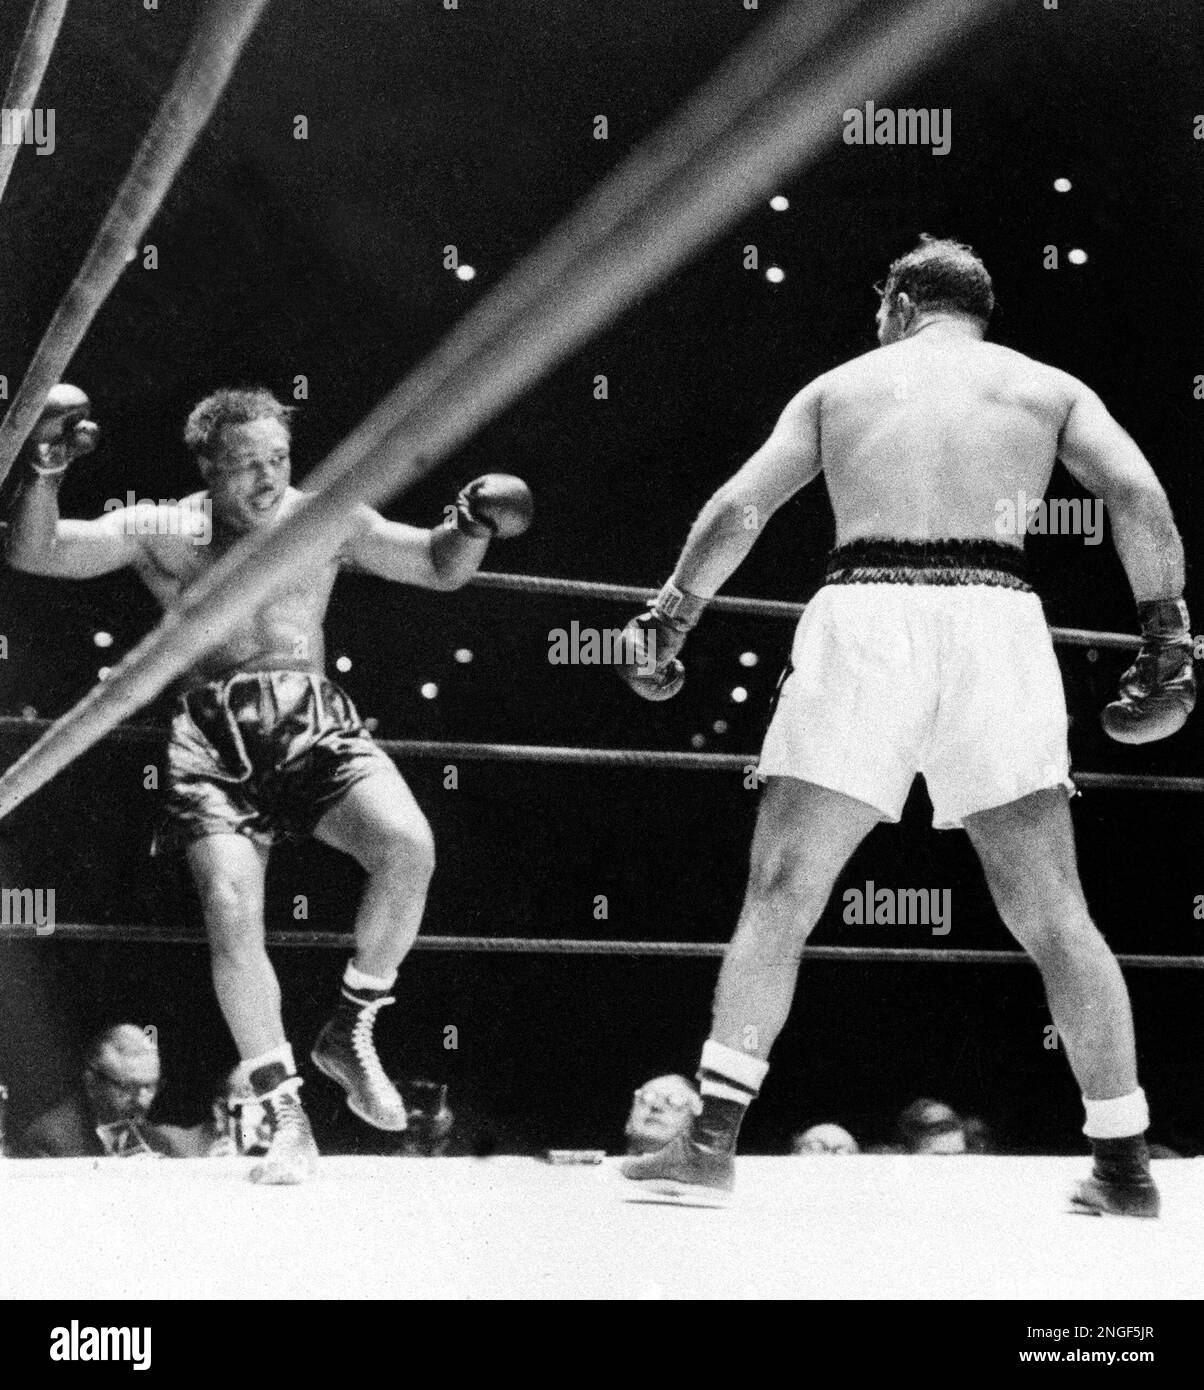 https://c8.alamy.com/comp/2NGF5JR/defending-heavyweight-champion-rocky-marciano-in-white-trunks-watches-as-challenger-archie-moore-goes-down-after-being-knocked-out-with-a-right-and-left-in-the-ninth-round-of-their-world-title-bout-at-yankee-stadium-in-the-bronx-new-york-city-september-21-1955-ap-photo-2NGF5JR.jpg